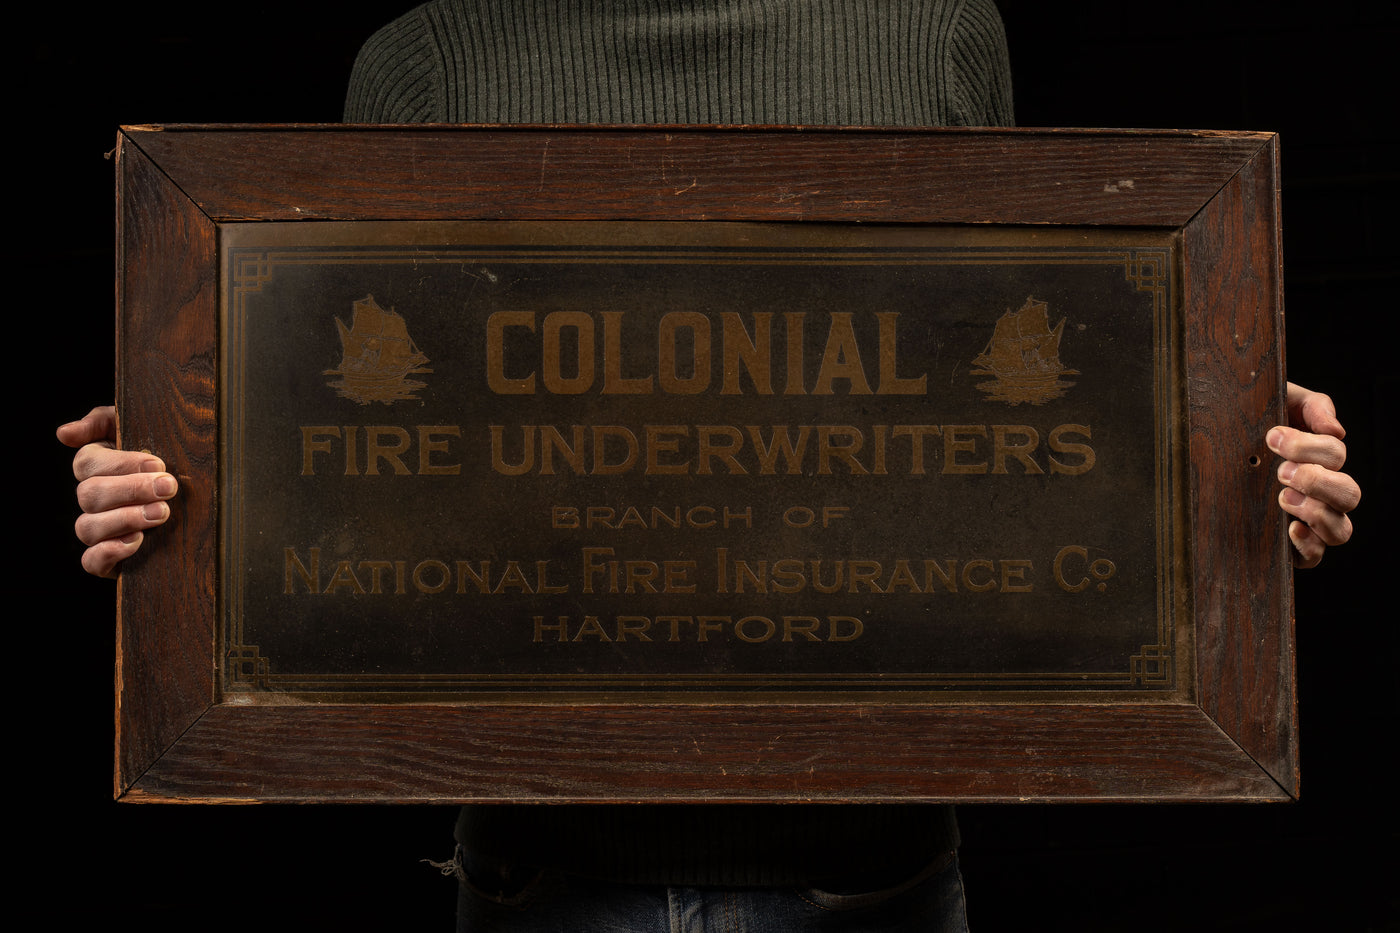 Vintage Framed Colonial Fire Underwriters Brass Sign